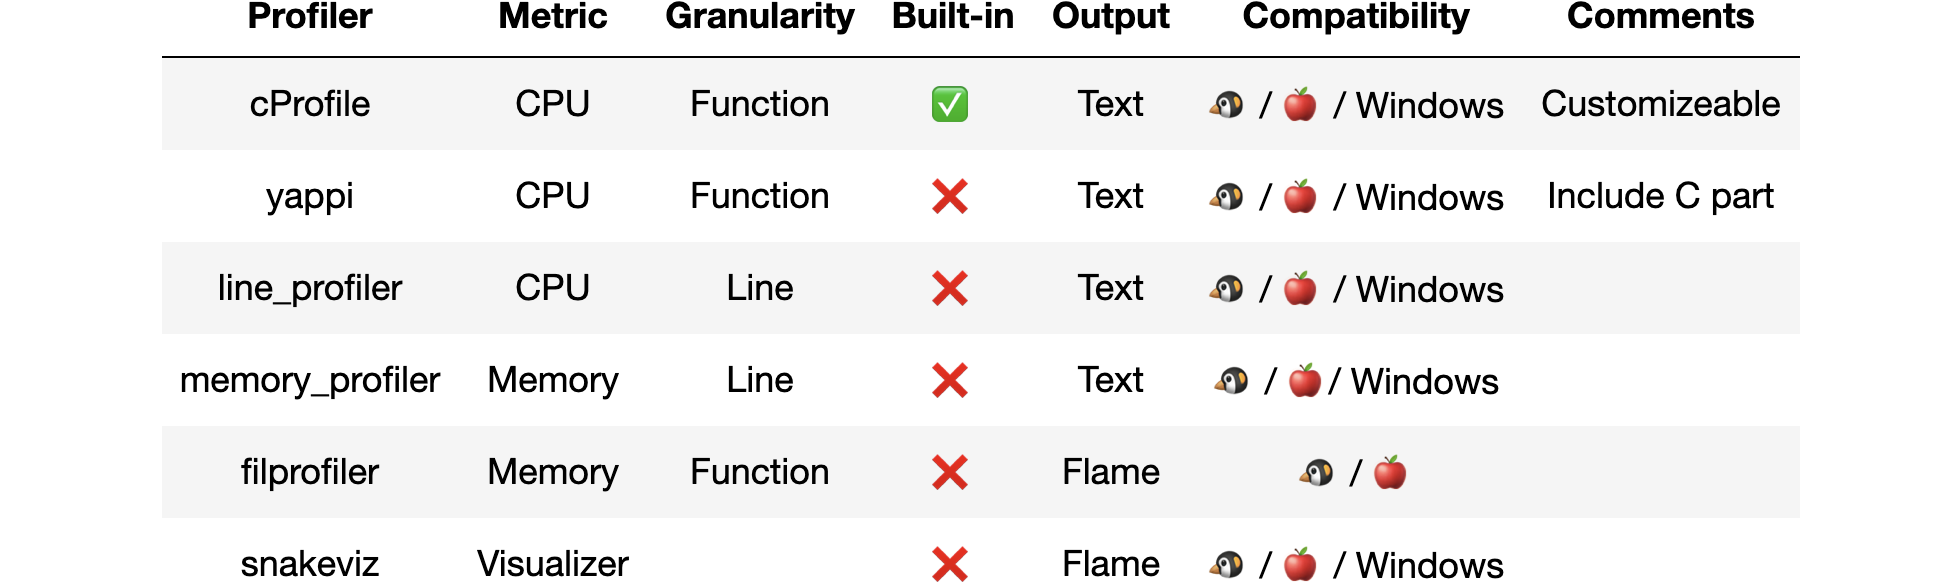 table comparing several offline profiling tools